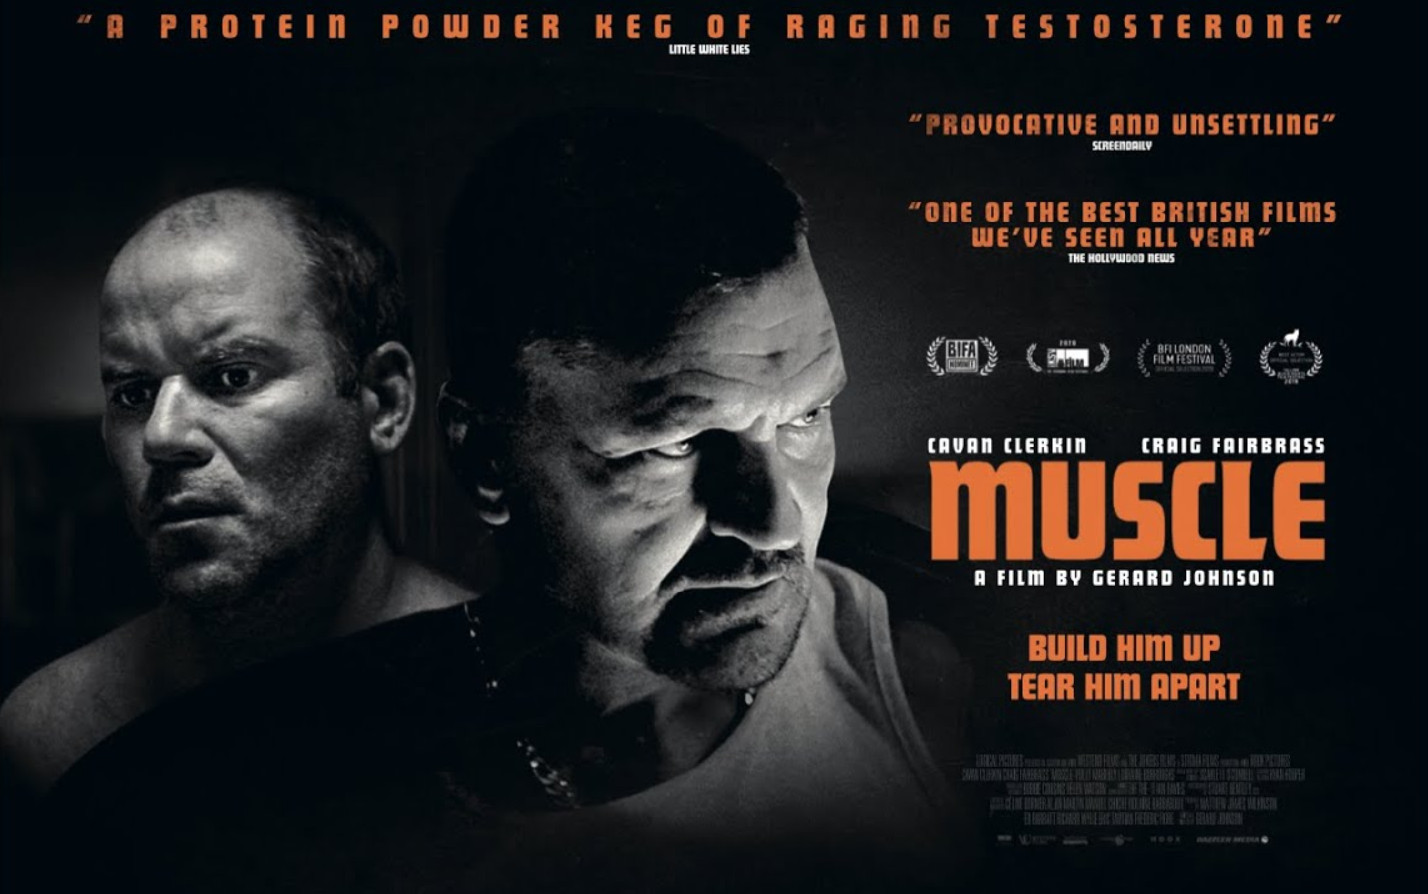 Muscle film